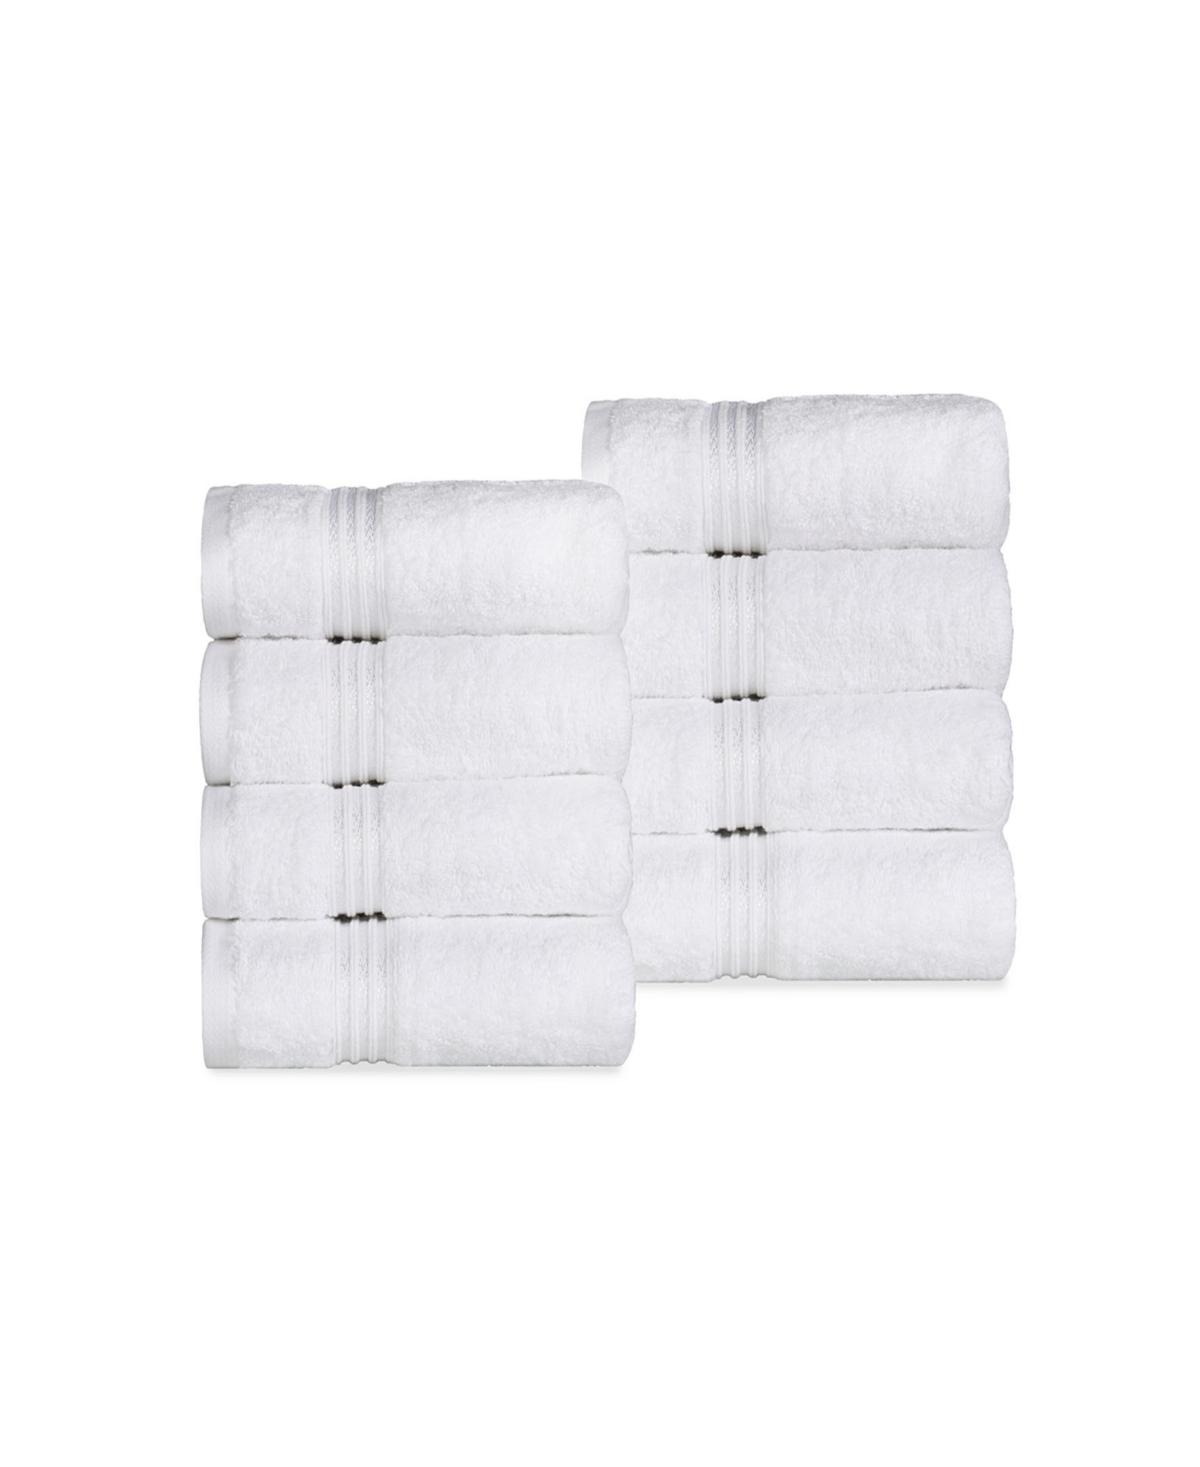 Superior Solid Quick Drying Absorbent 8 Piece Egyptian Cotton Hand Towel Set Bedding In White